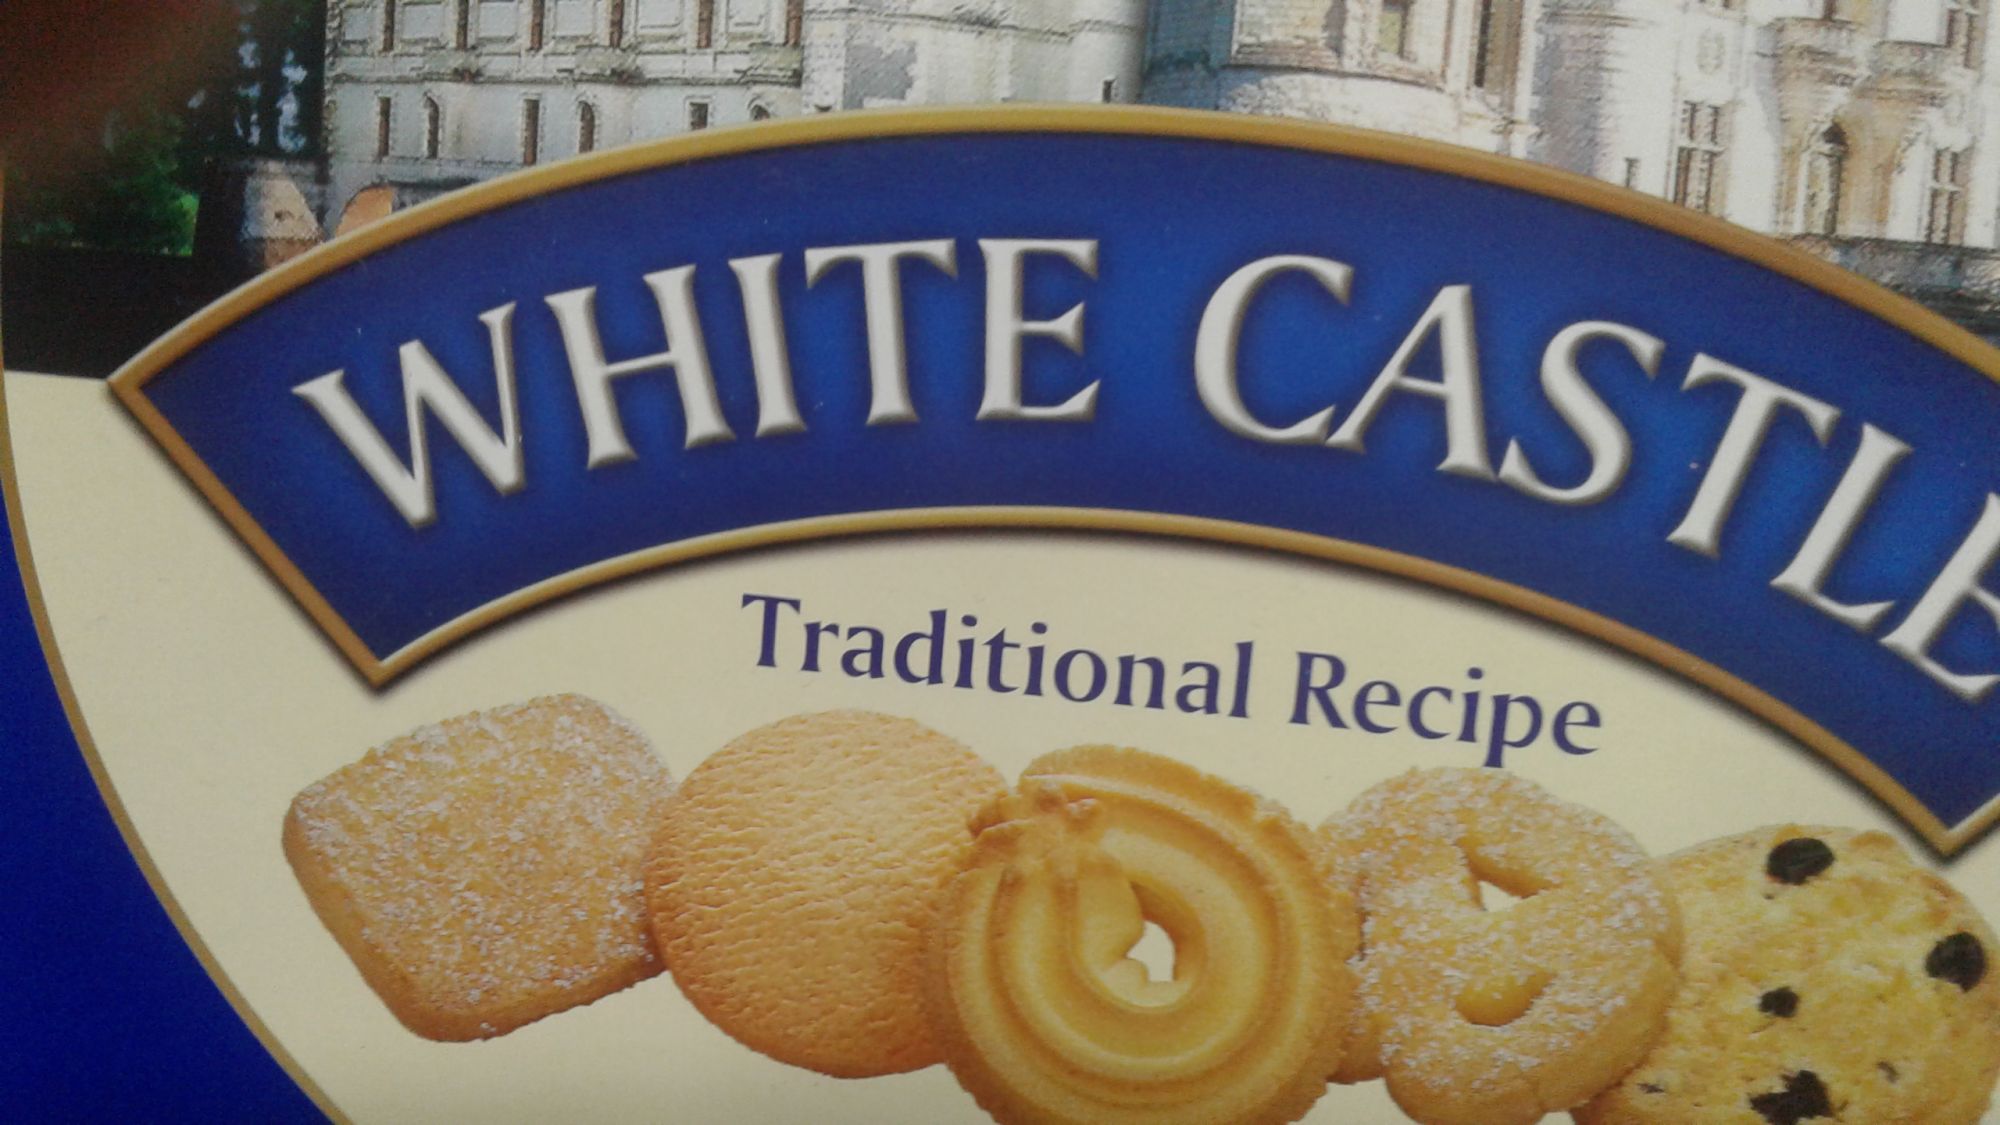 White castle butter cookies